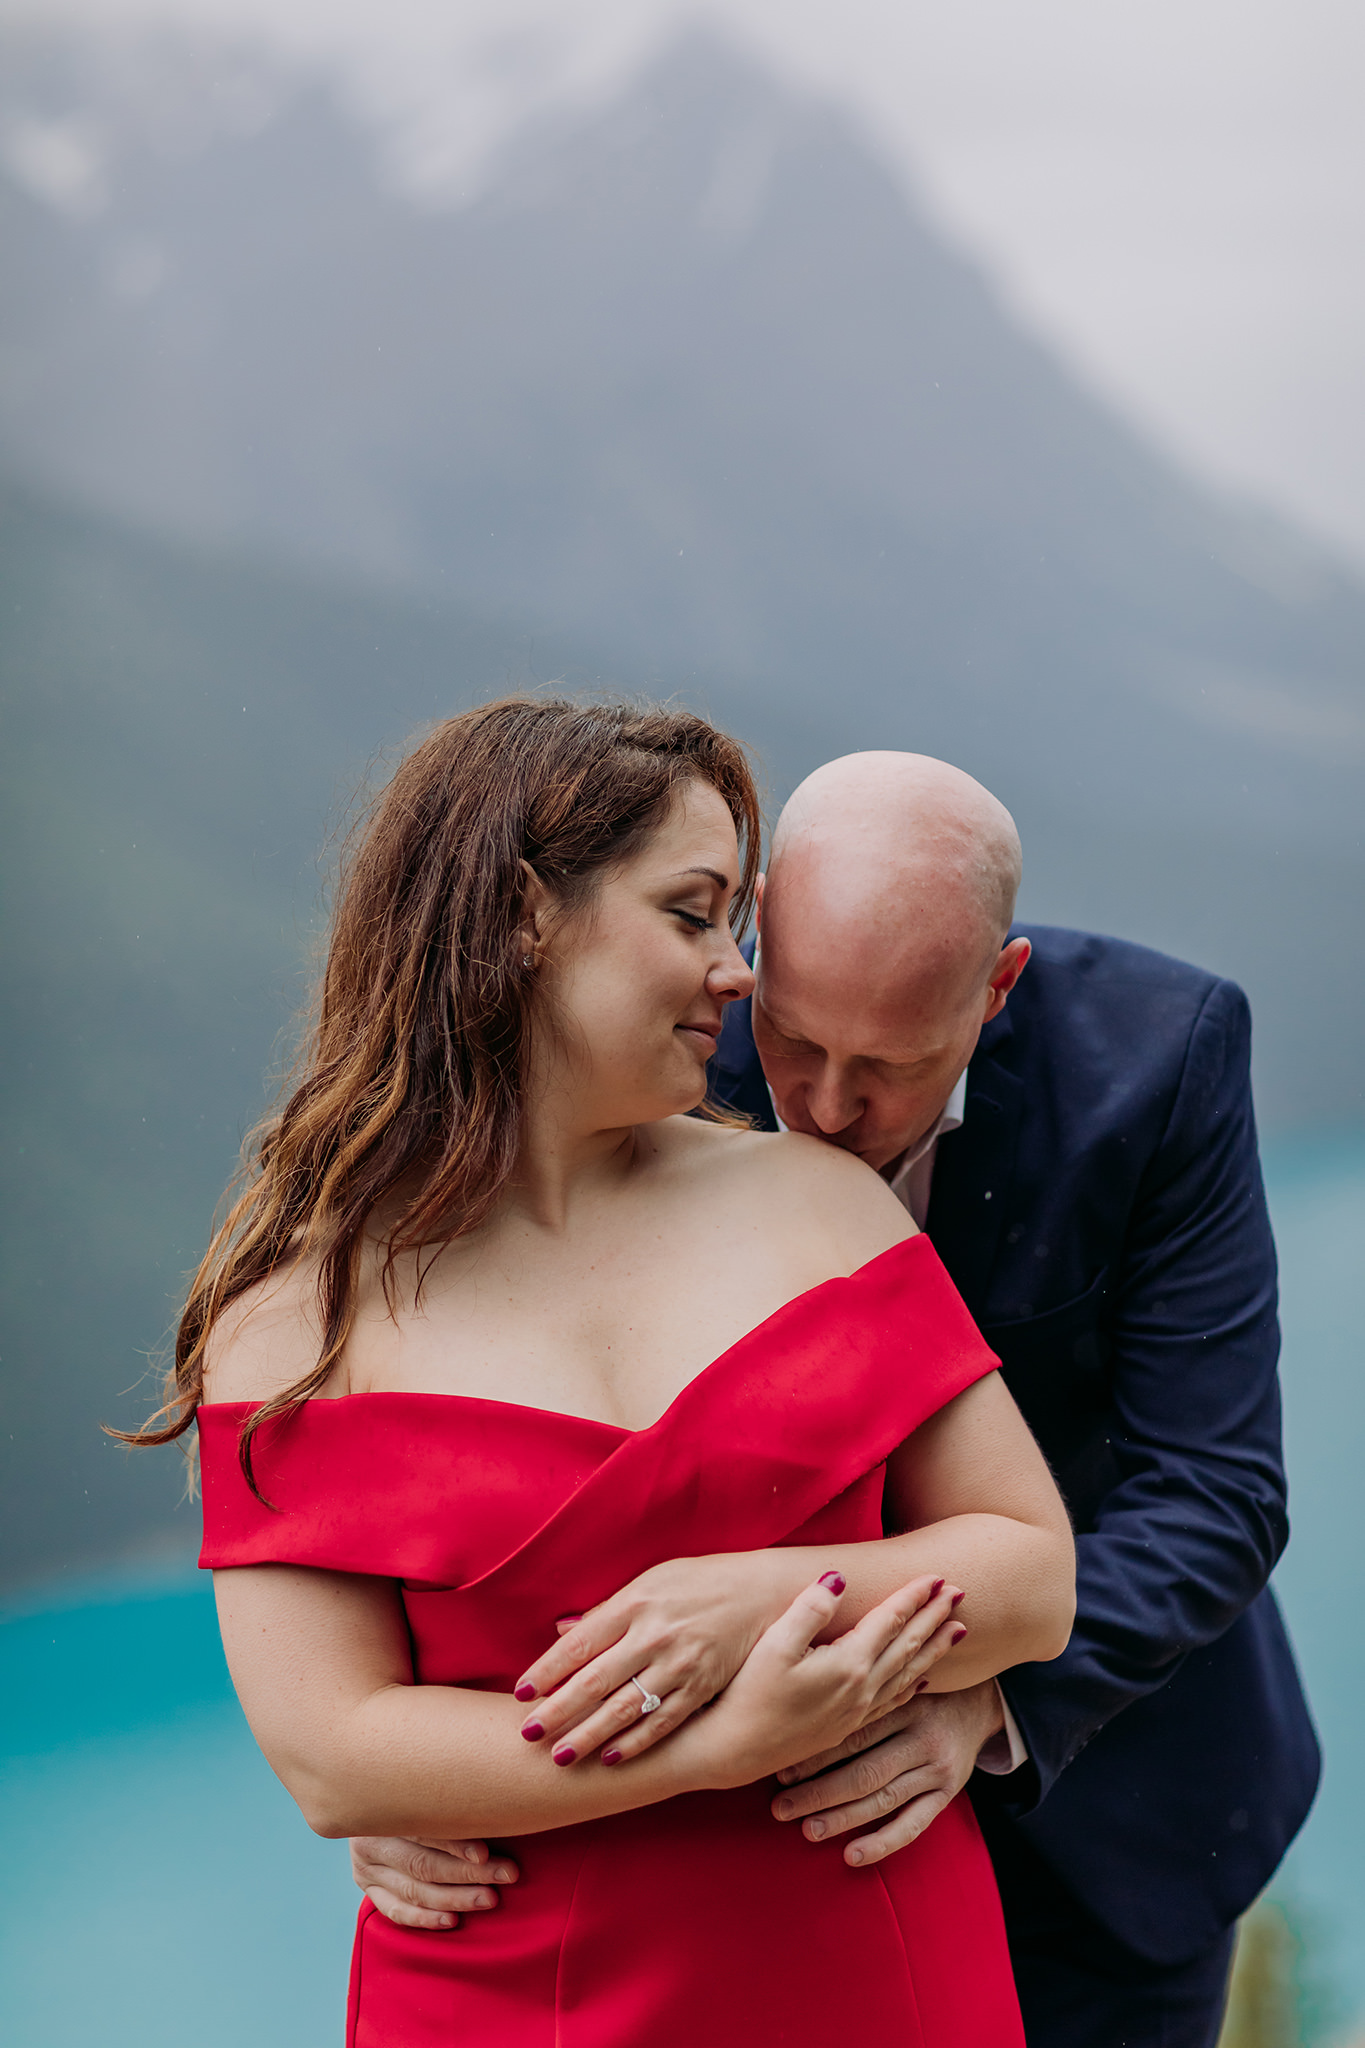 Bow Summit on Icefields Parkway couples vacation photos on a cold rainy day in the mountains in Banff National Park. Featuring stunning red evening gown & dramatic mountain views photographed by ENV Photography